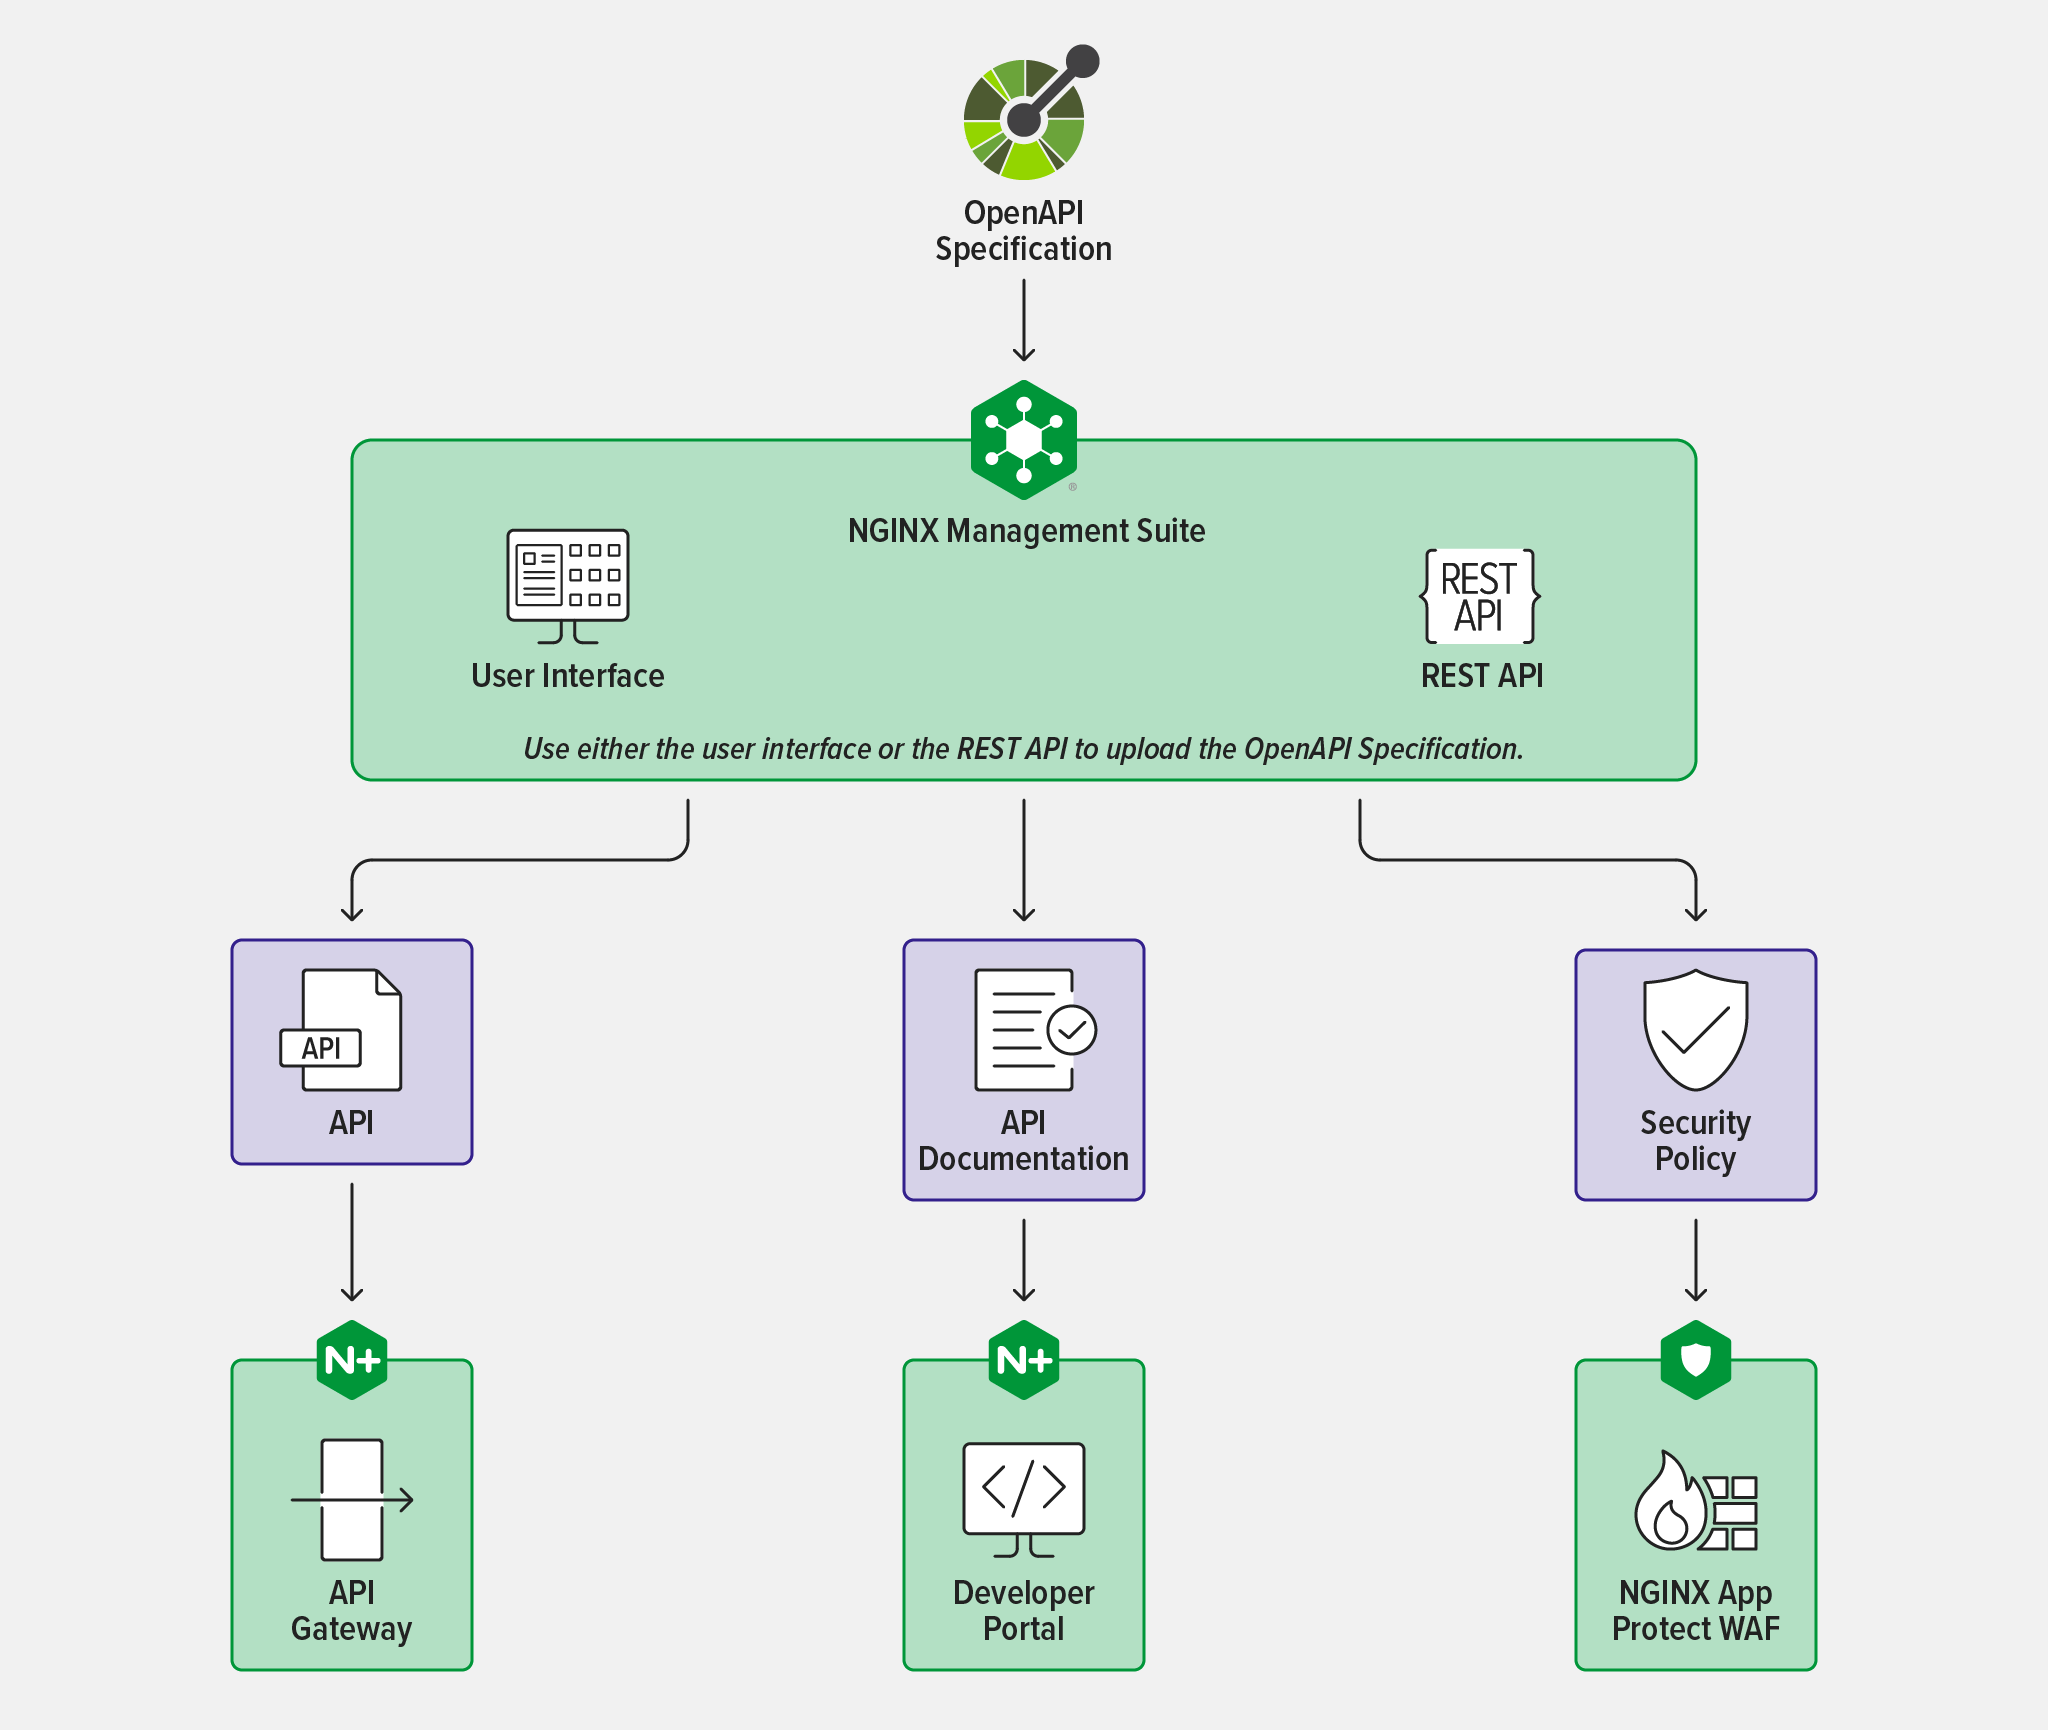 Diagram showing how API Connectivity Manager leverages an OpenAPI Specification for three uses: publishing the API to an API gateway, publishing documentation at the developer portal, and setting security policies on a WAF